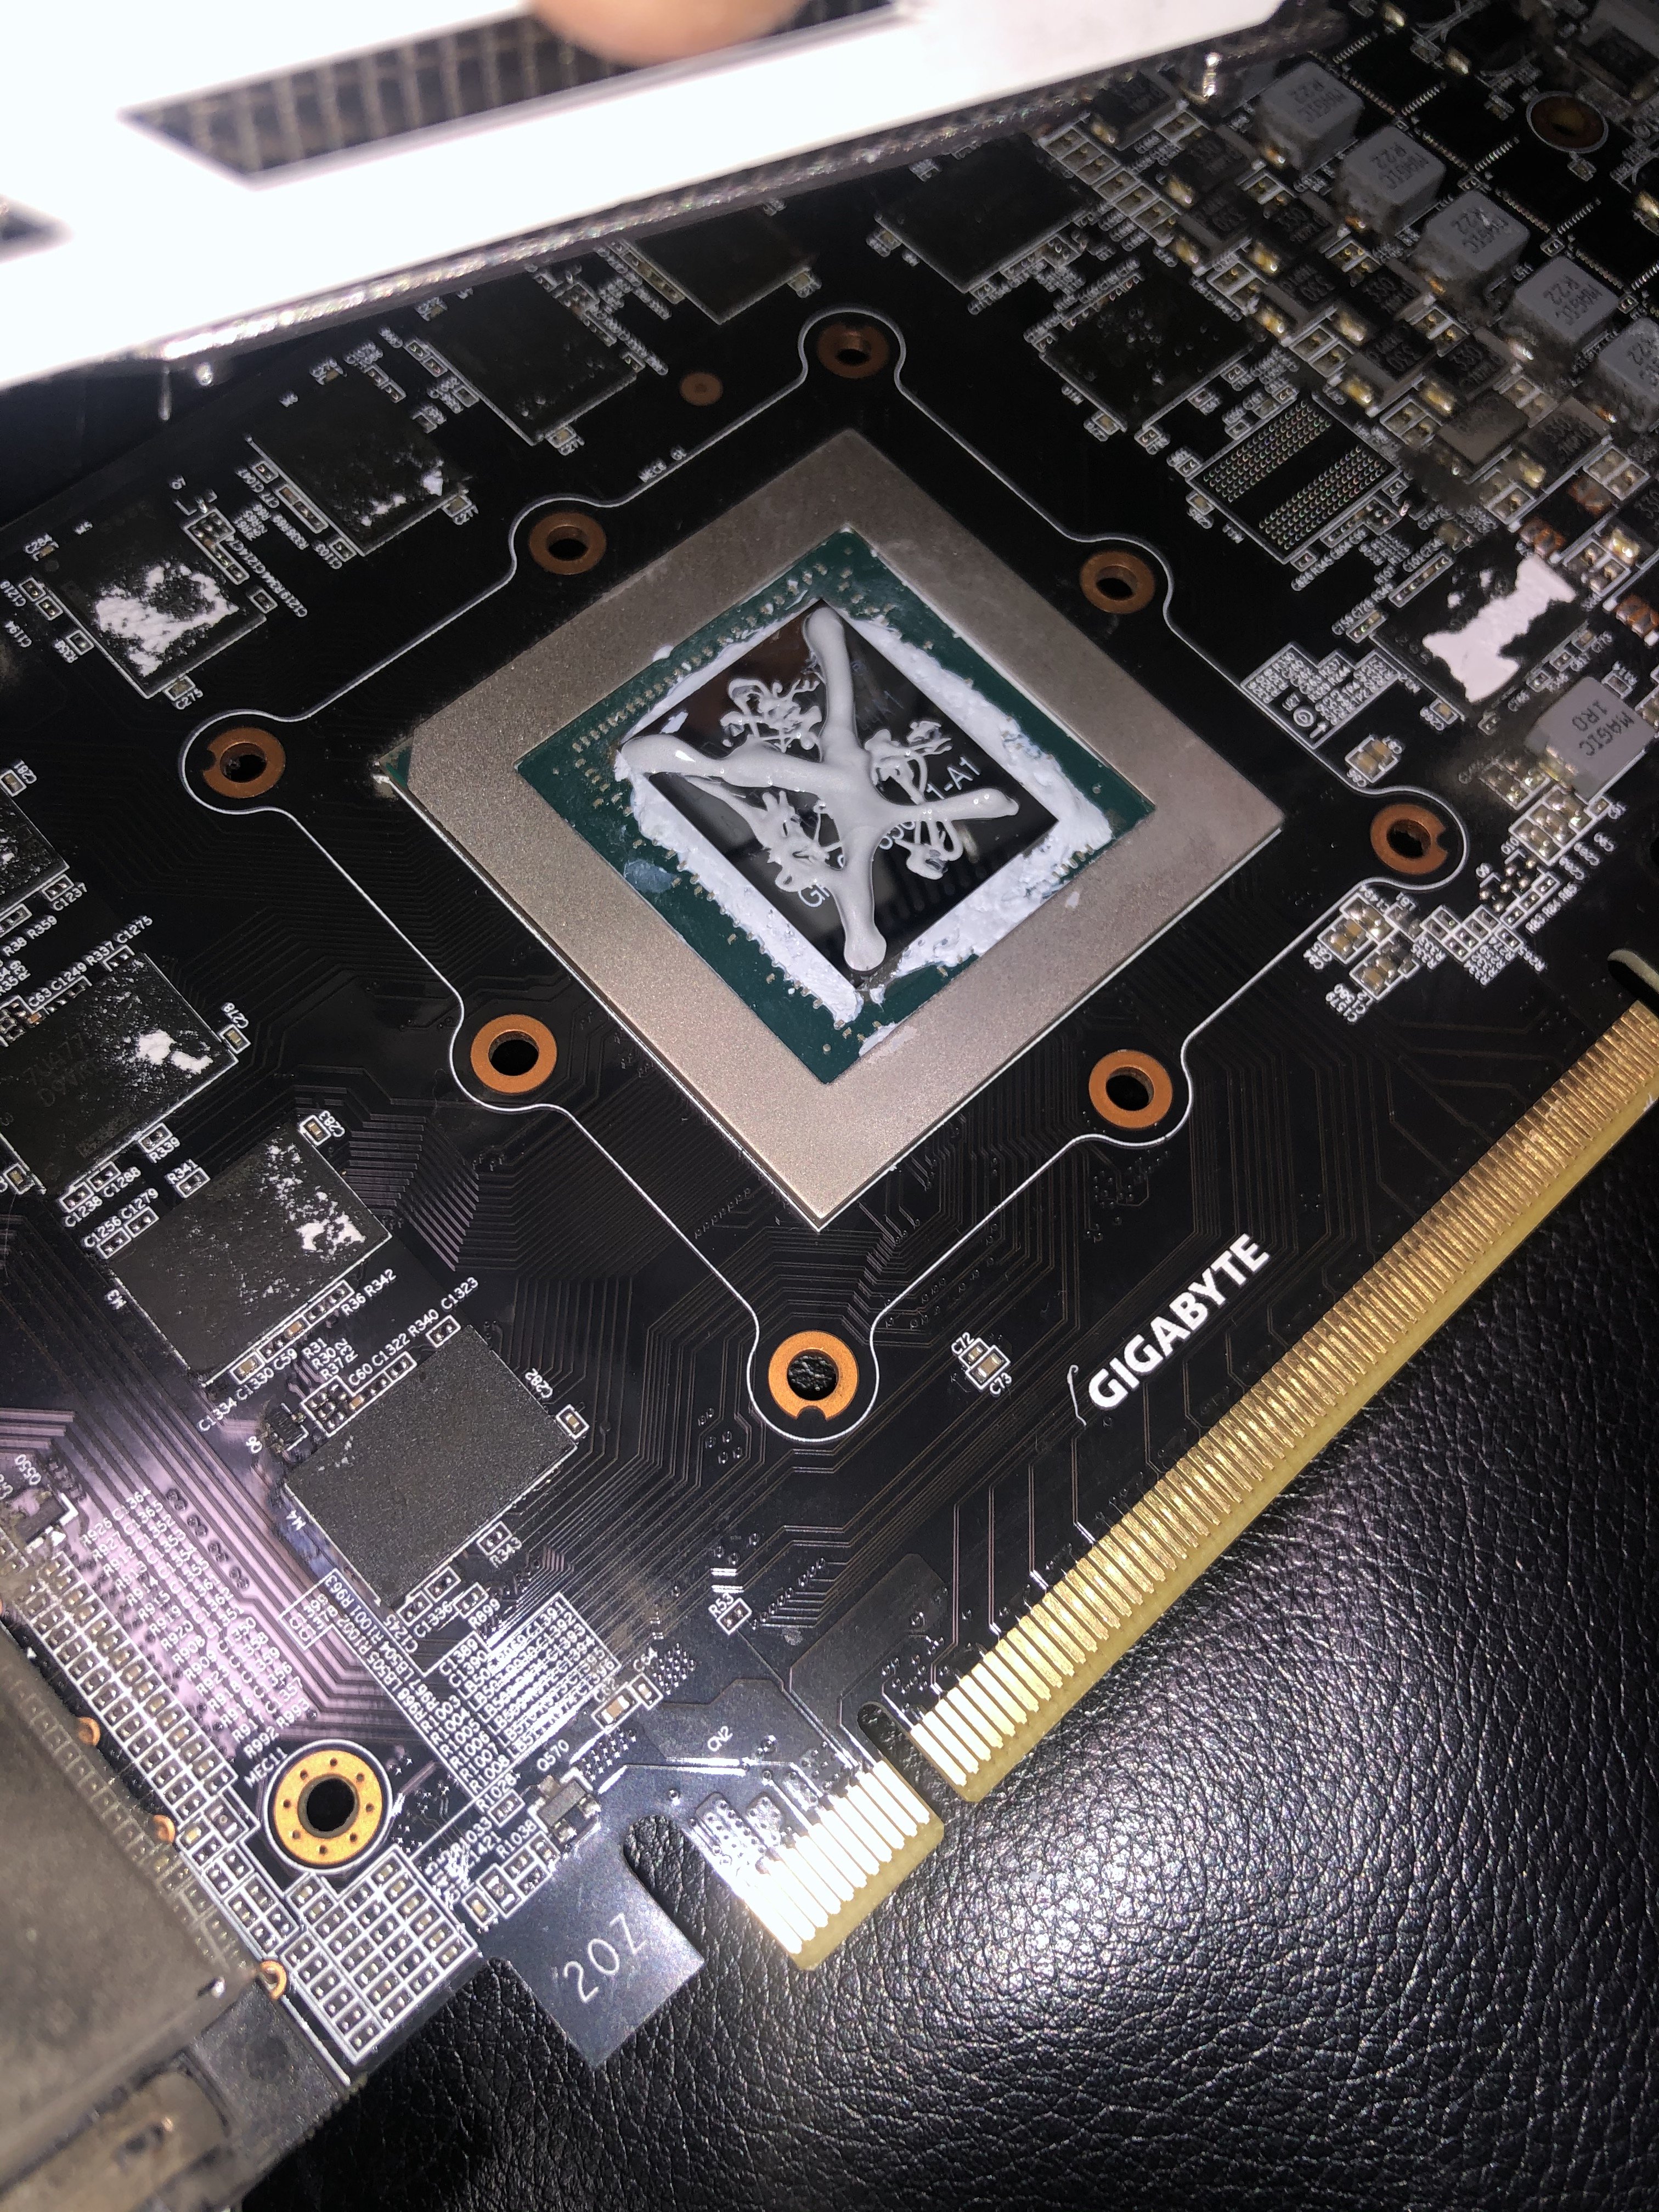 Recently upgraded my graphics card, now my running hot. | TechPowerUp Forums